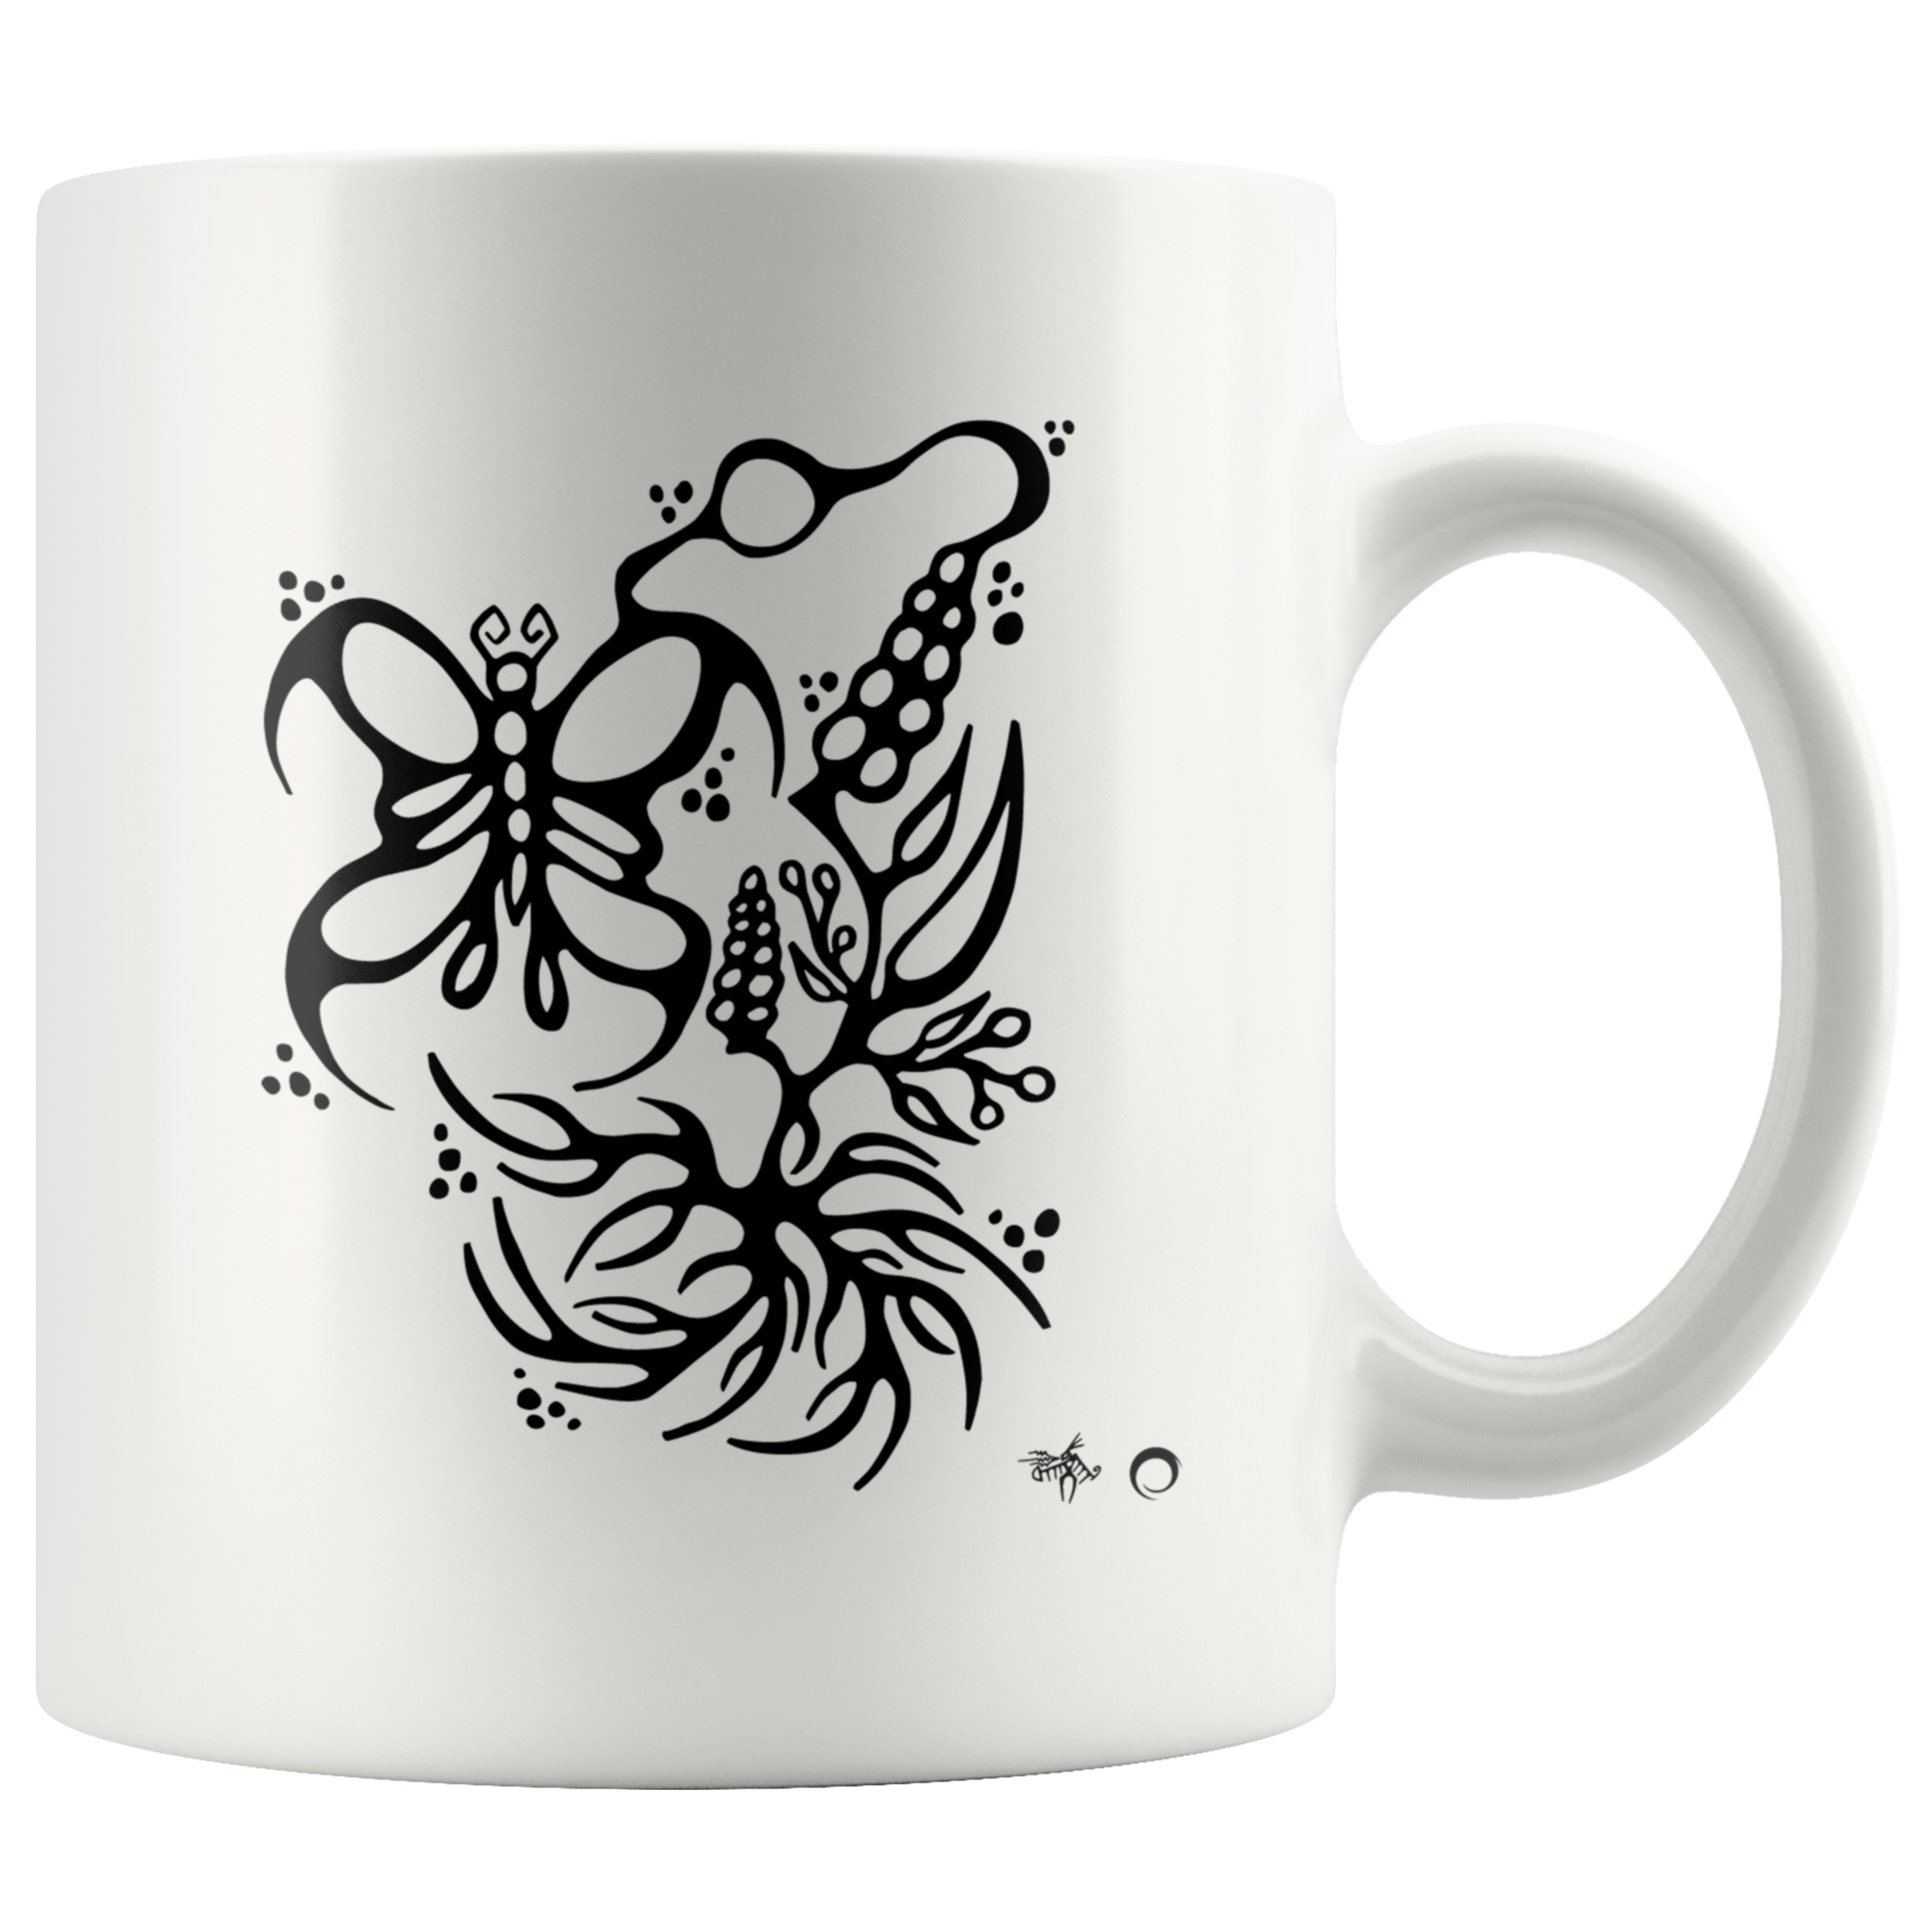 Butterfly & Floral Mug by Miigizi